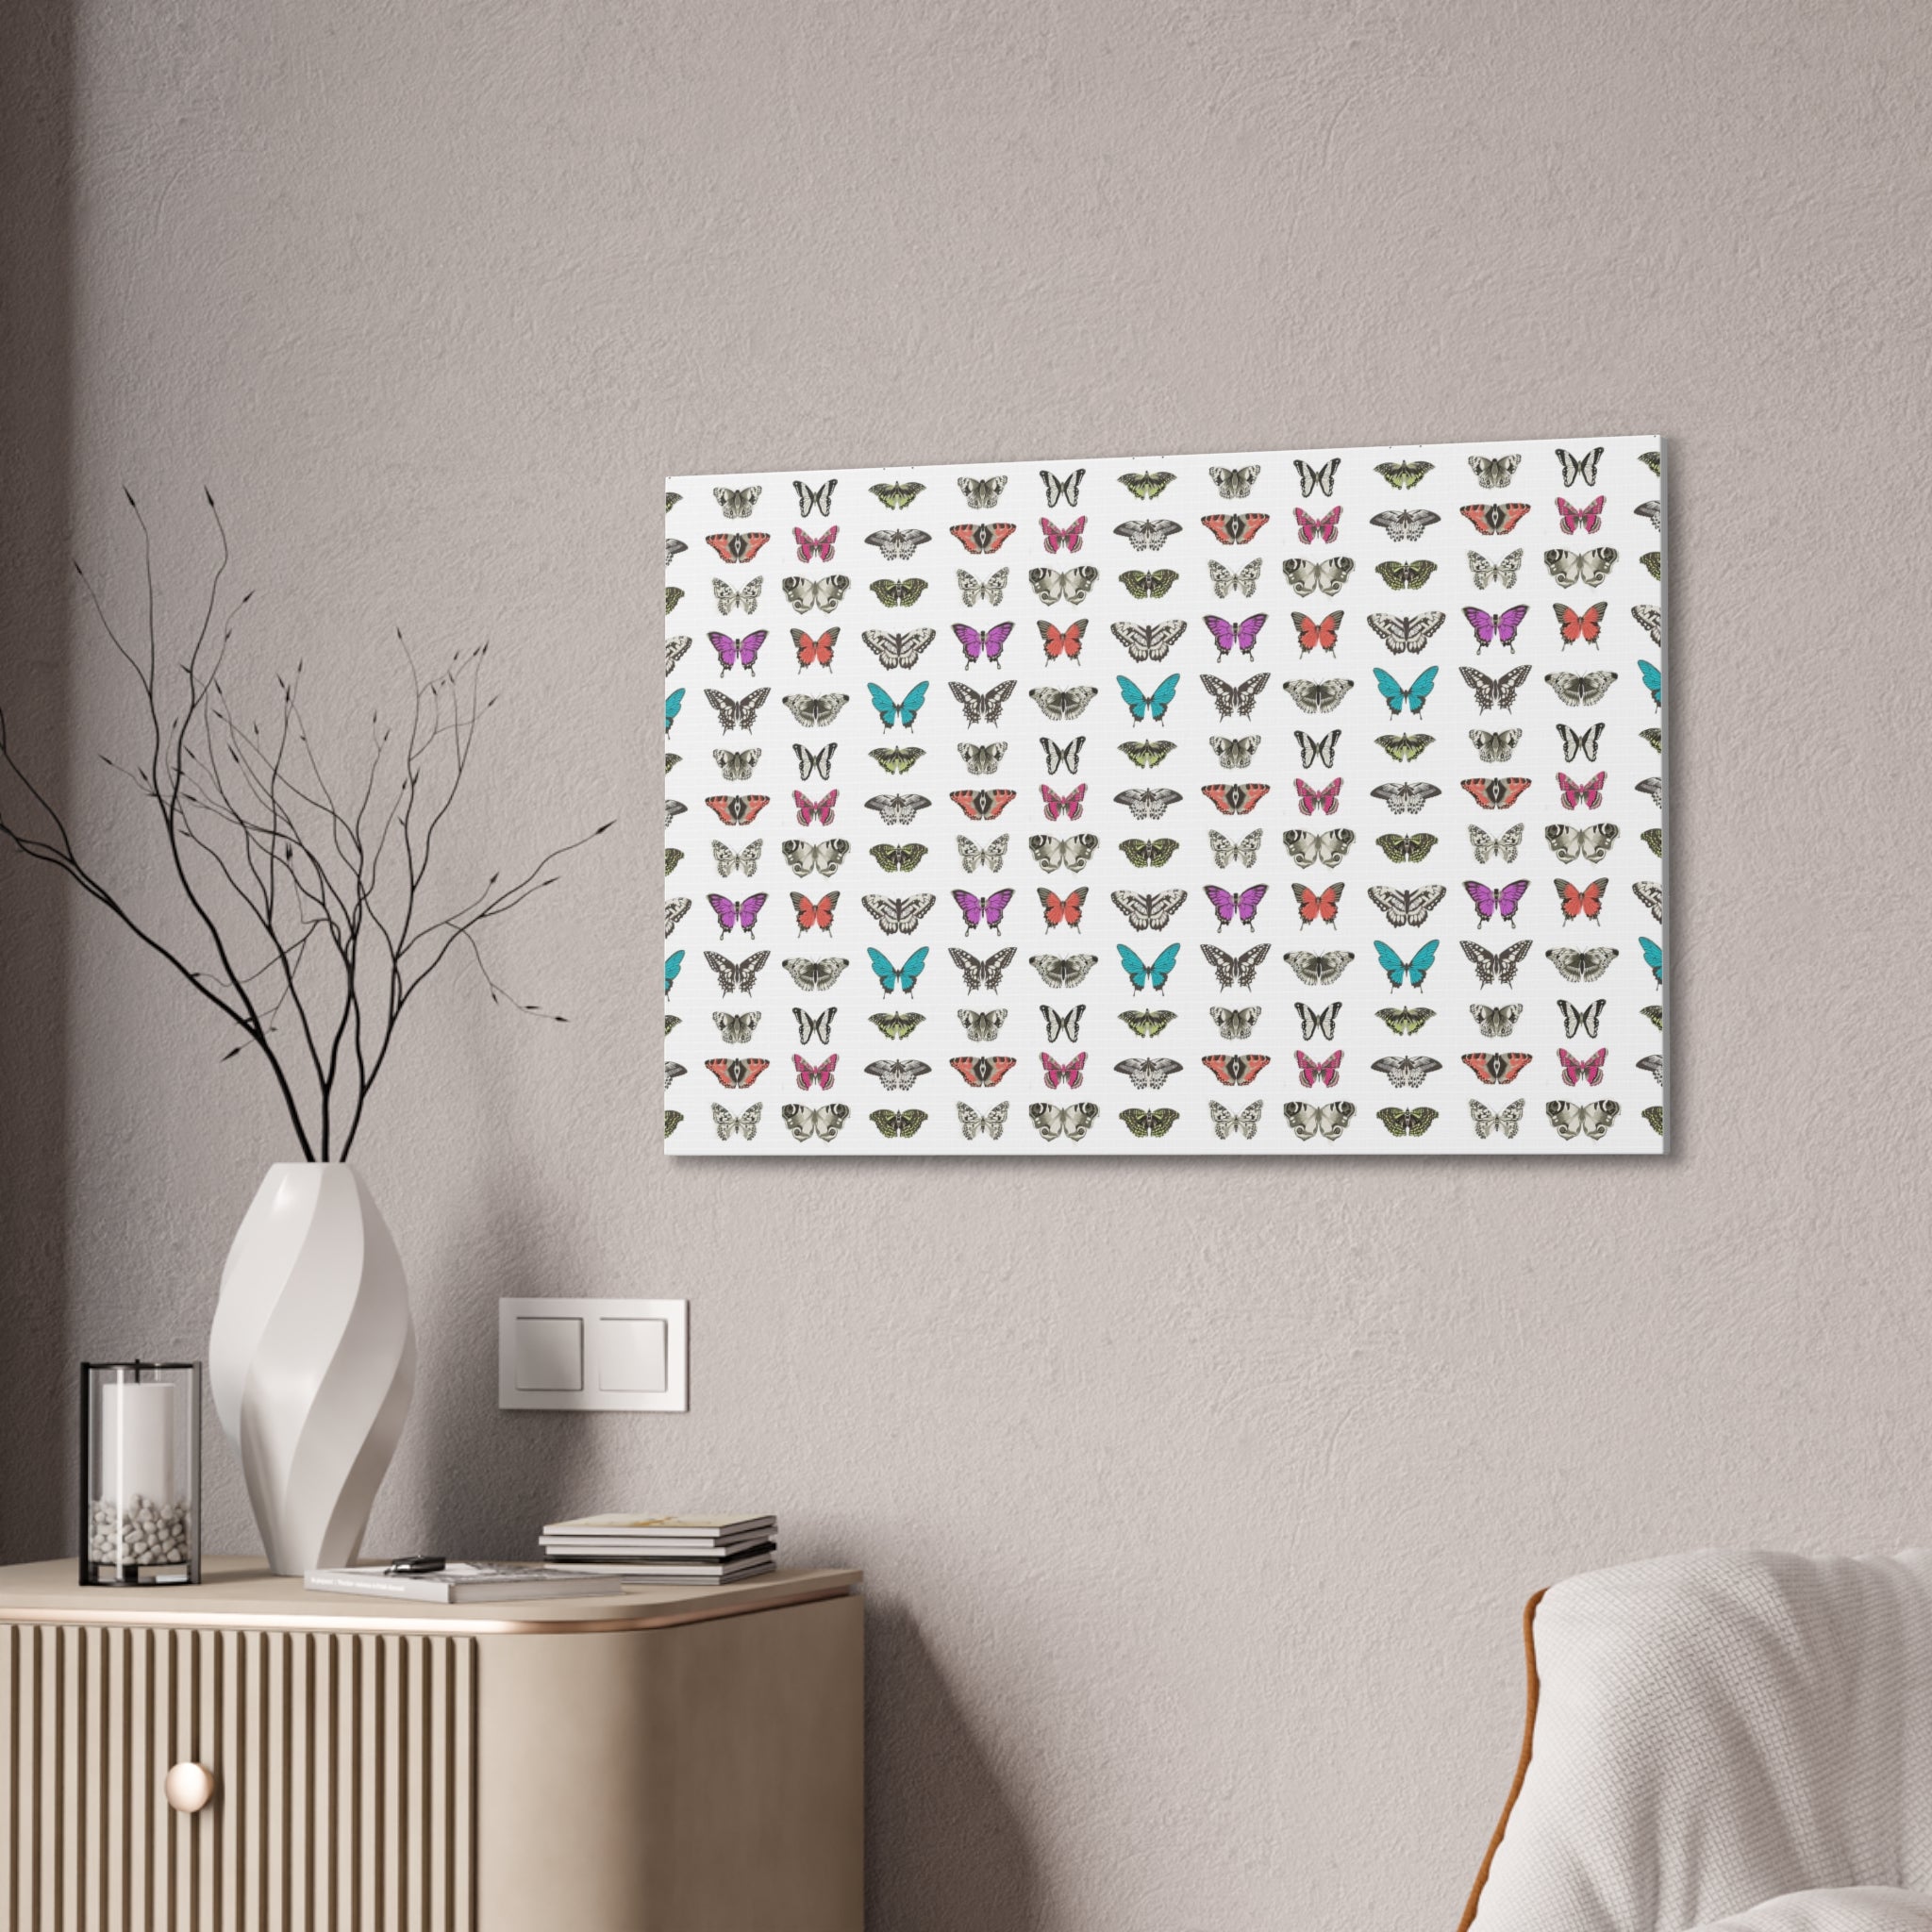 Butterfly and Moth Stretched Canvas